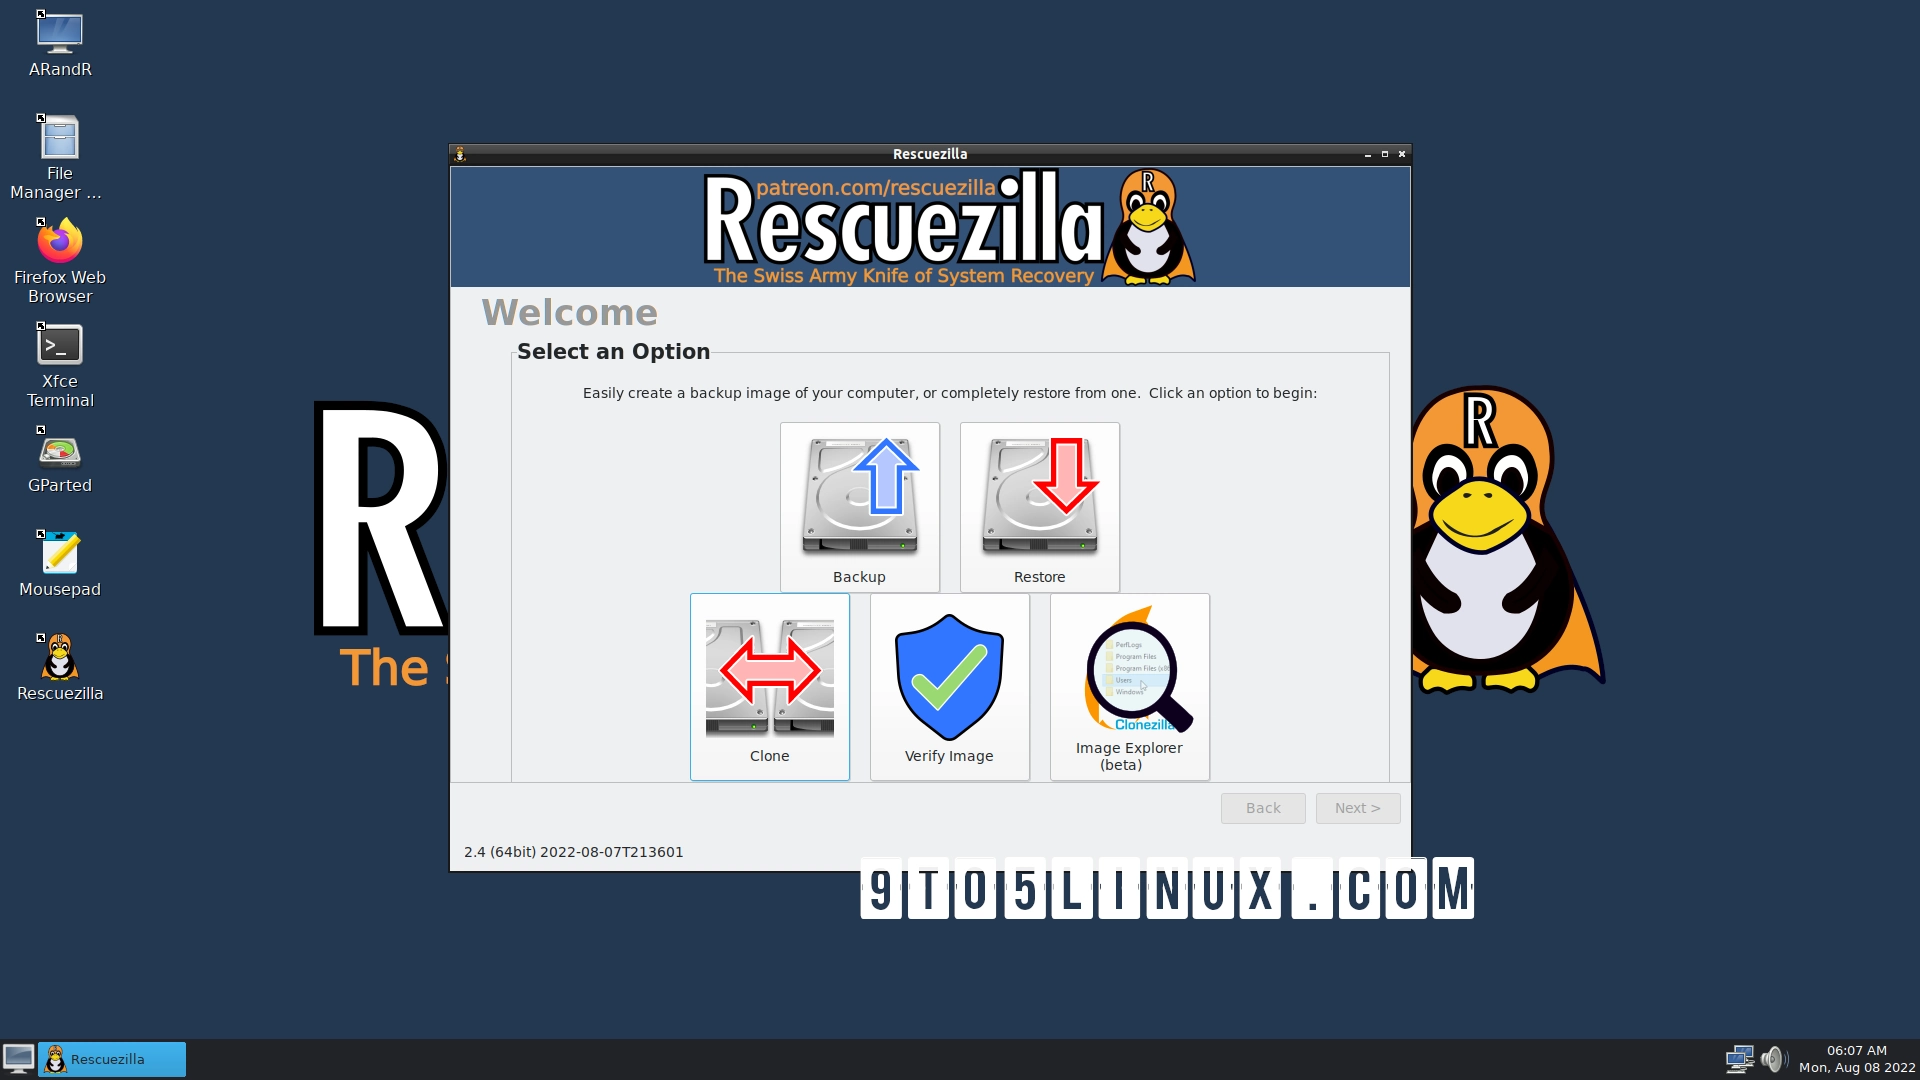 Rescuezilla 2.4 Swiss Army Knife of System Recovery Arrives Based on Ubuntu 22.04 LTS